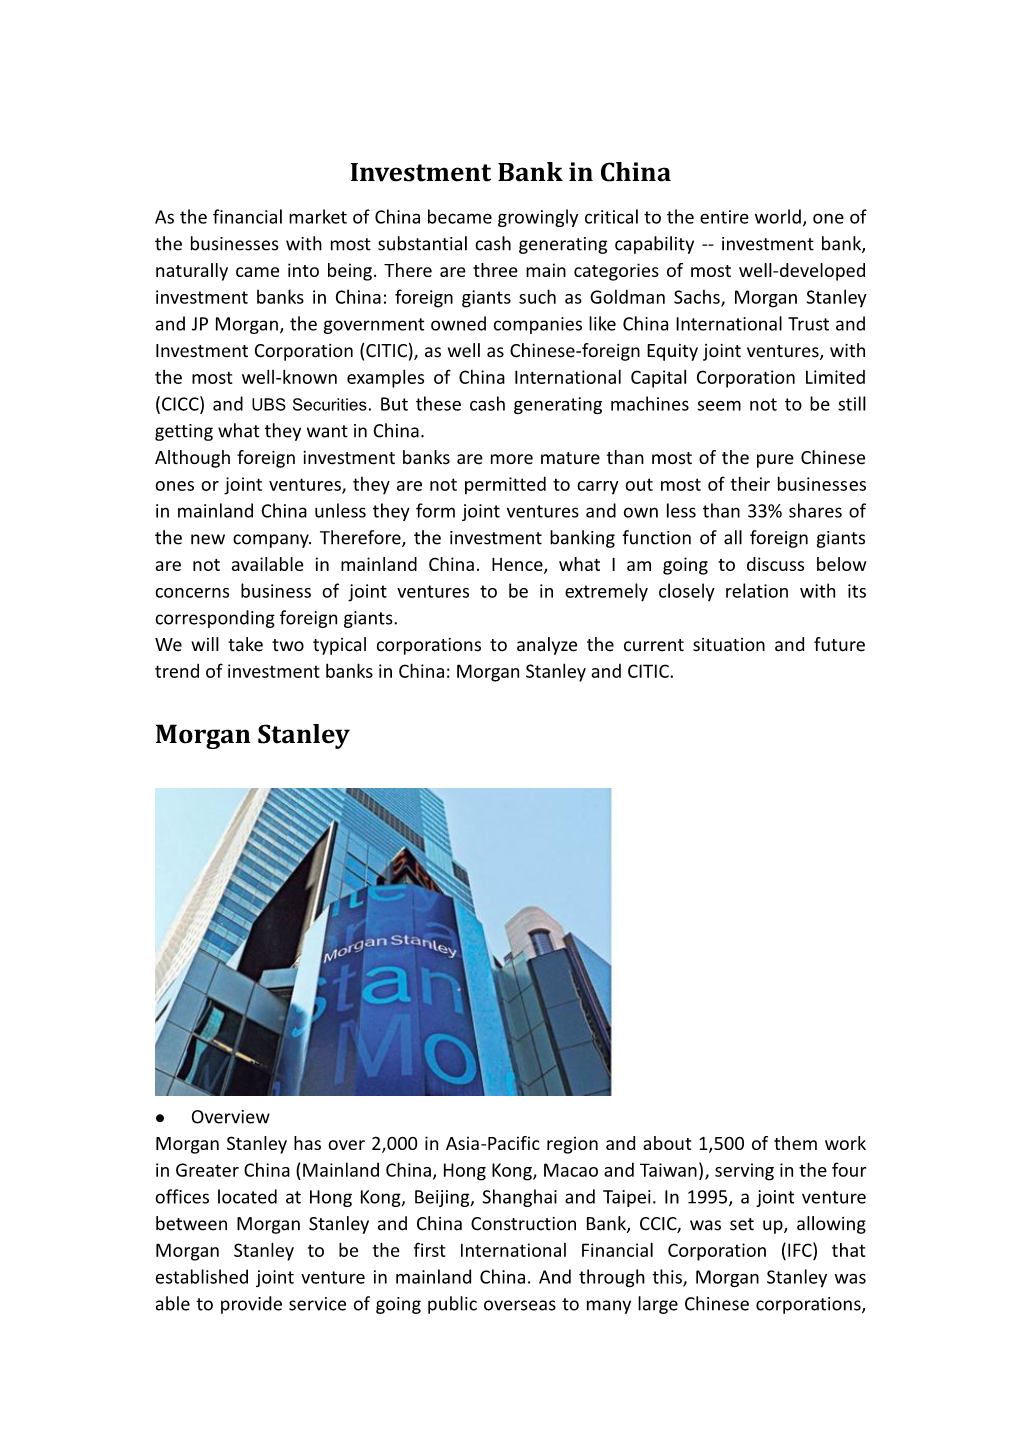 Investment Bank in China Morgan Stanley